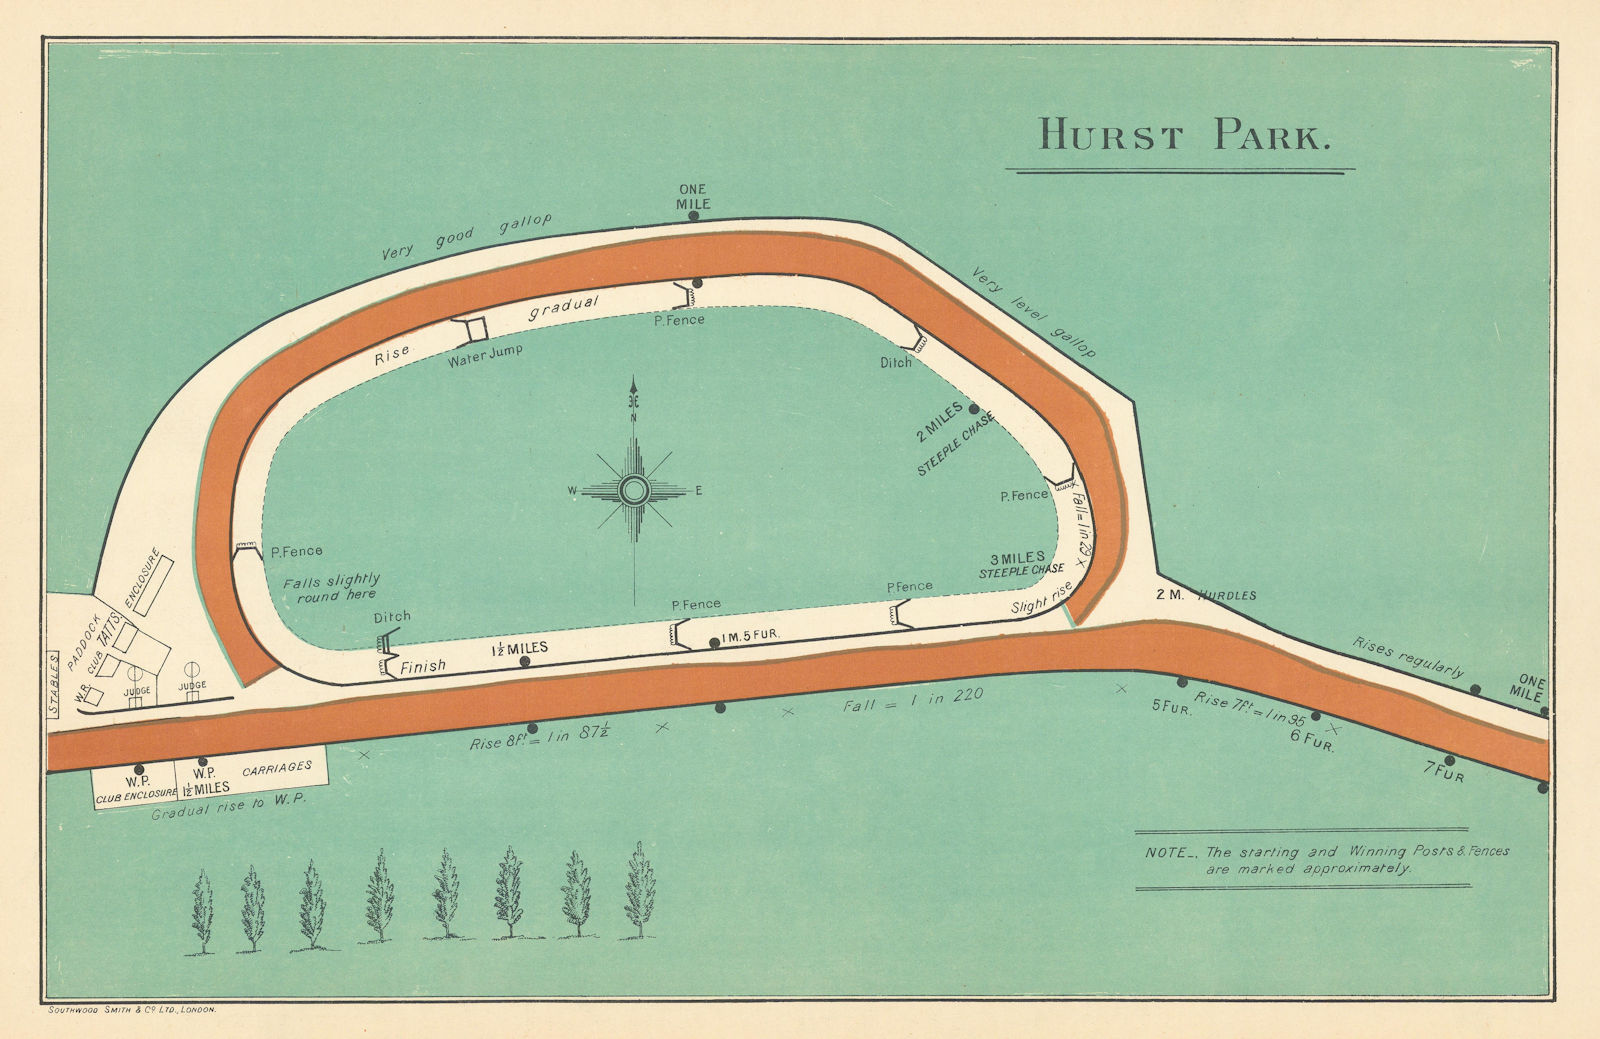 Hurst Park racecourse, Surrey. Closed 1962. West Molesey. BAYLES 1903 old map